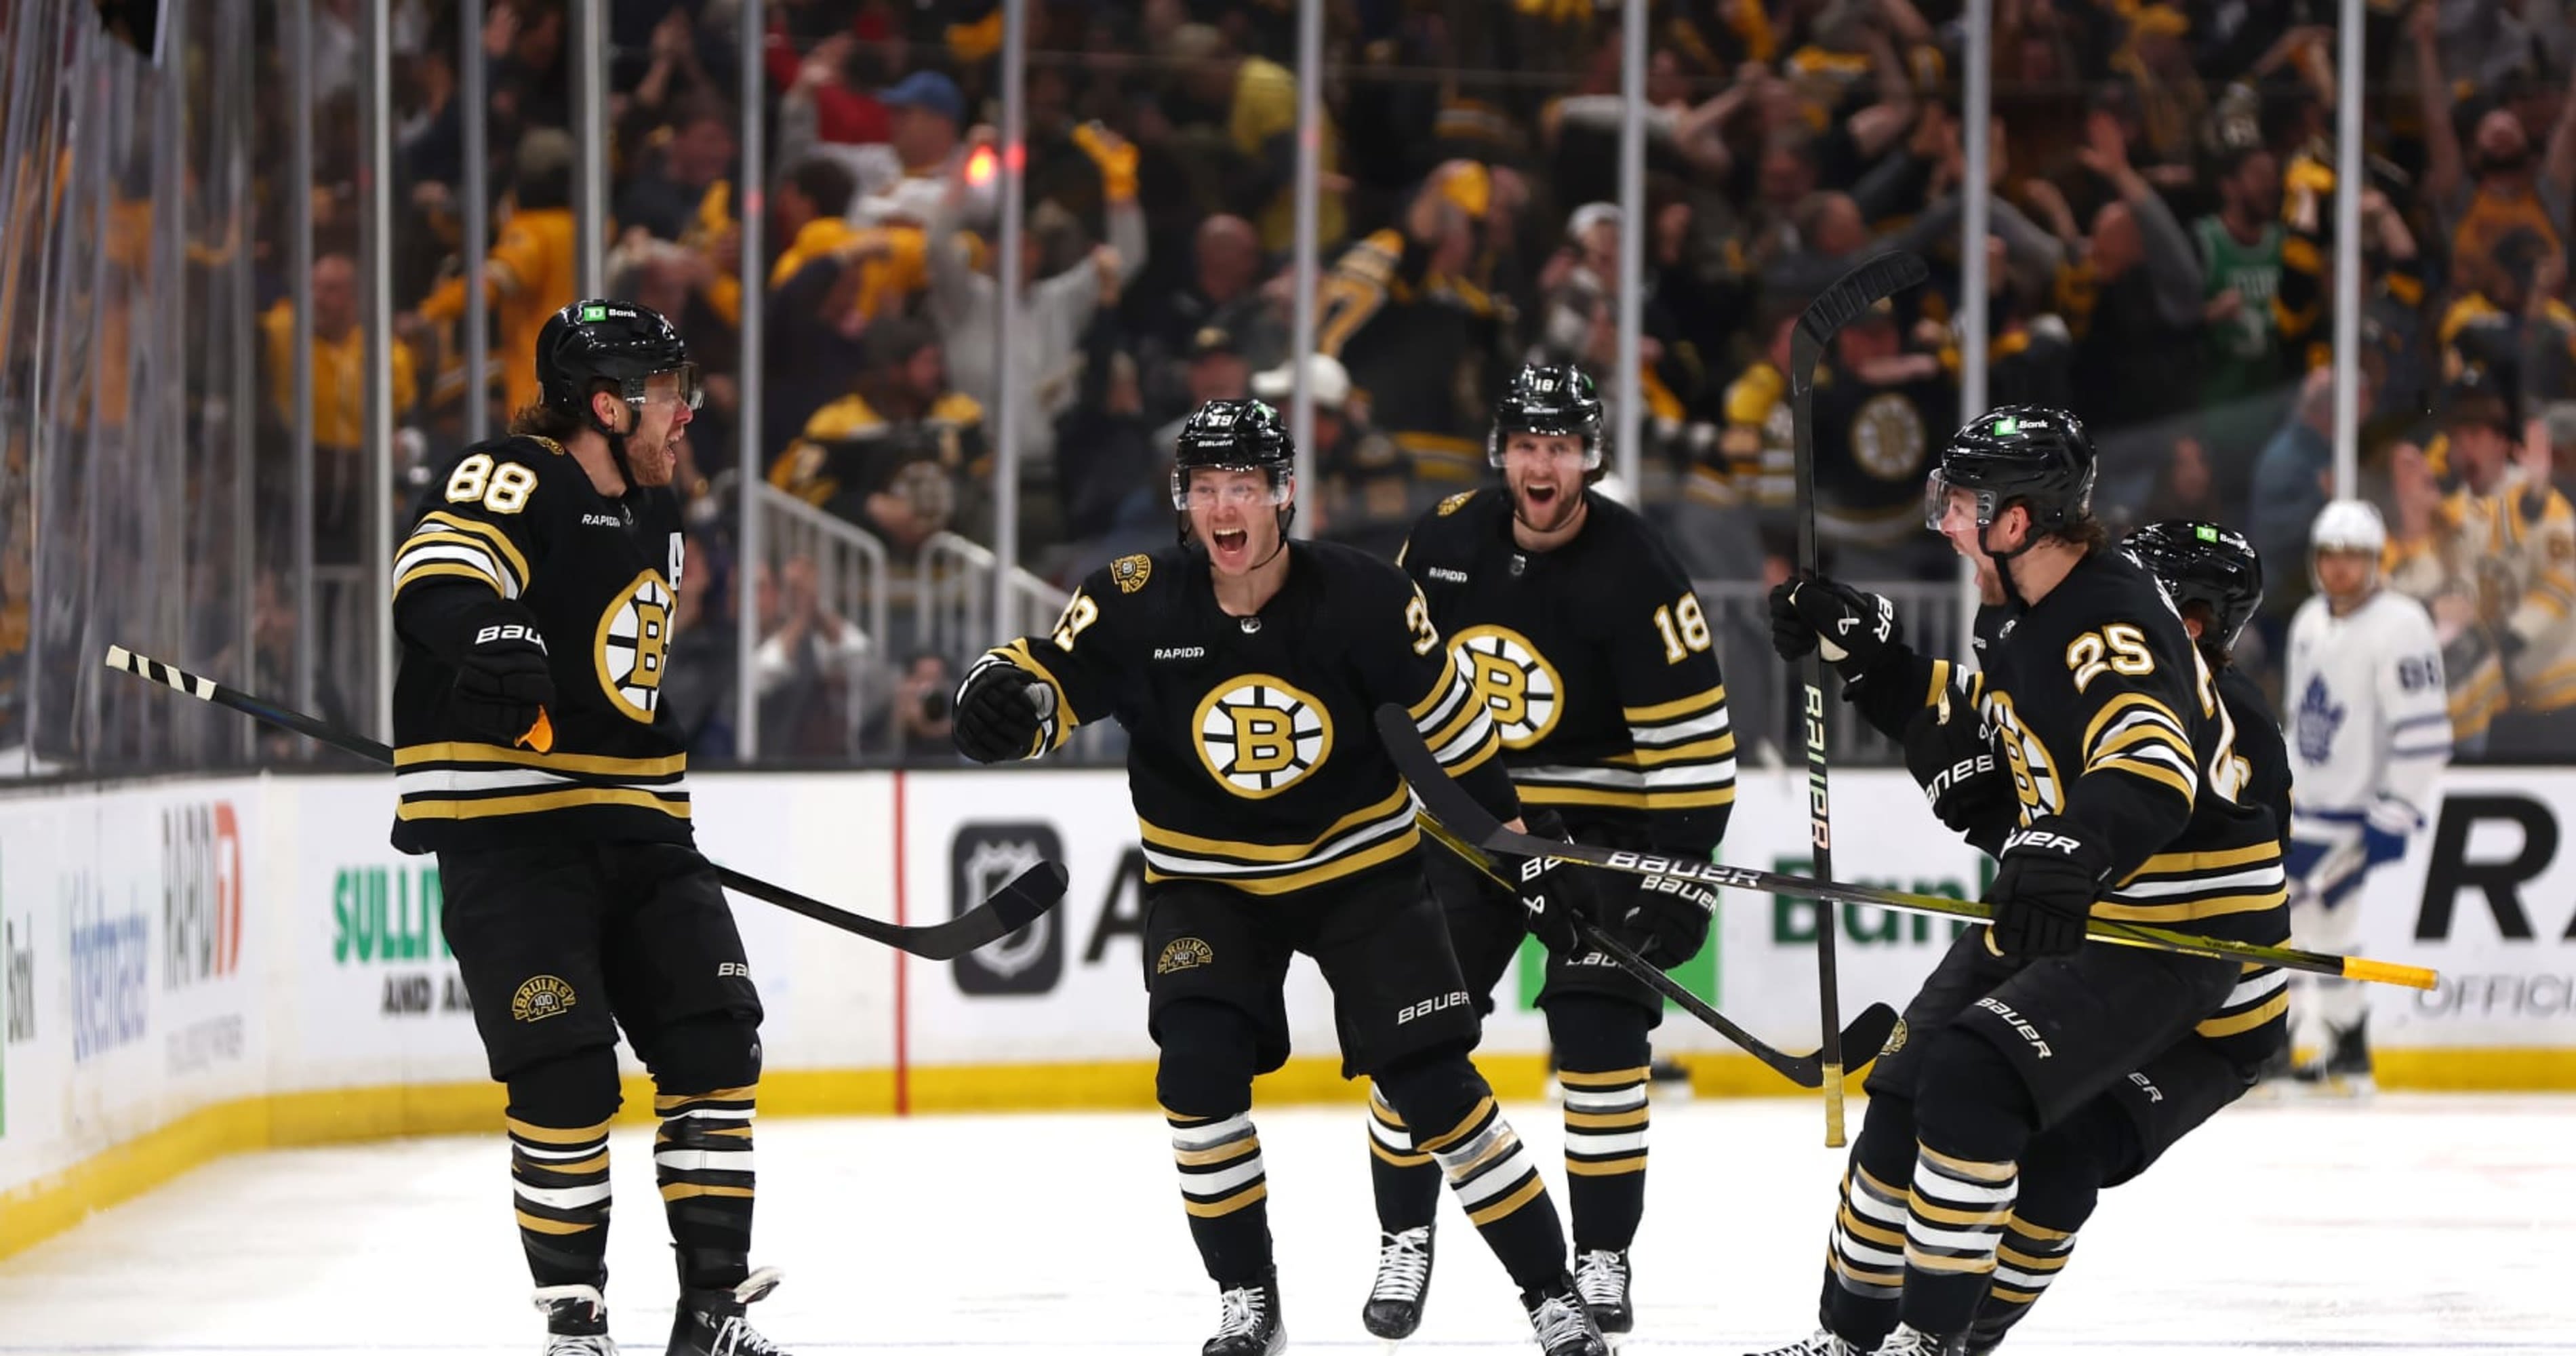 Bruins' David Pastrnak Exhilarates NHL Fans with OT Goal as Maple Leafs Eliminated